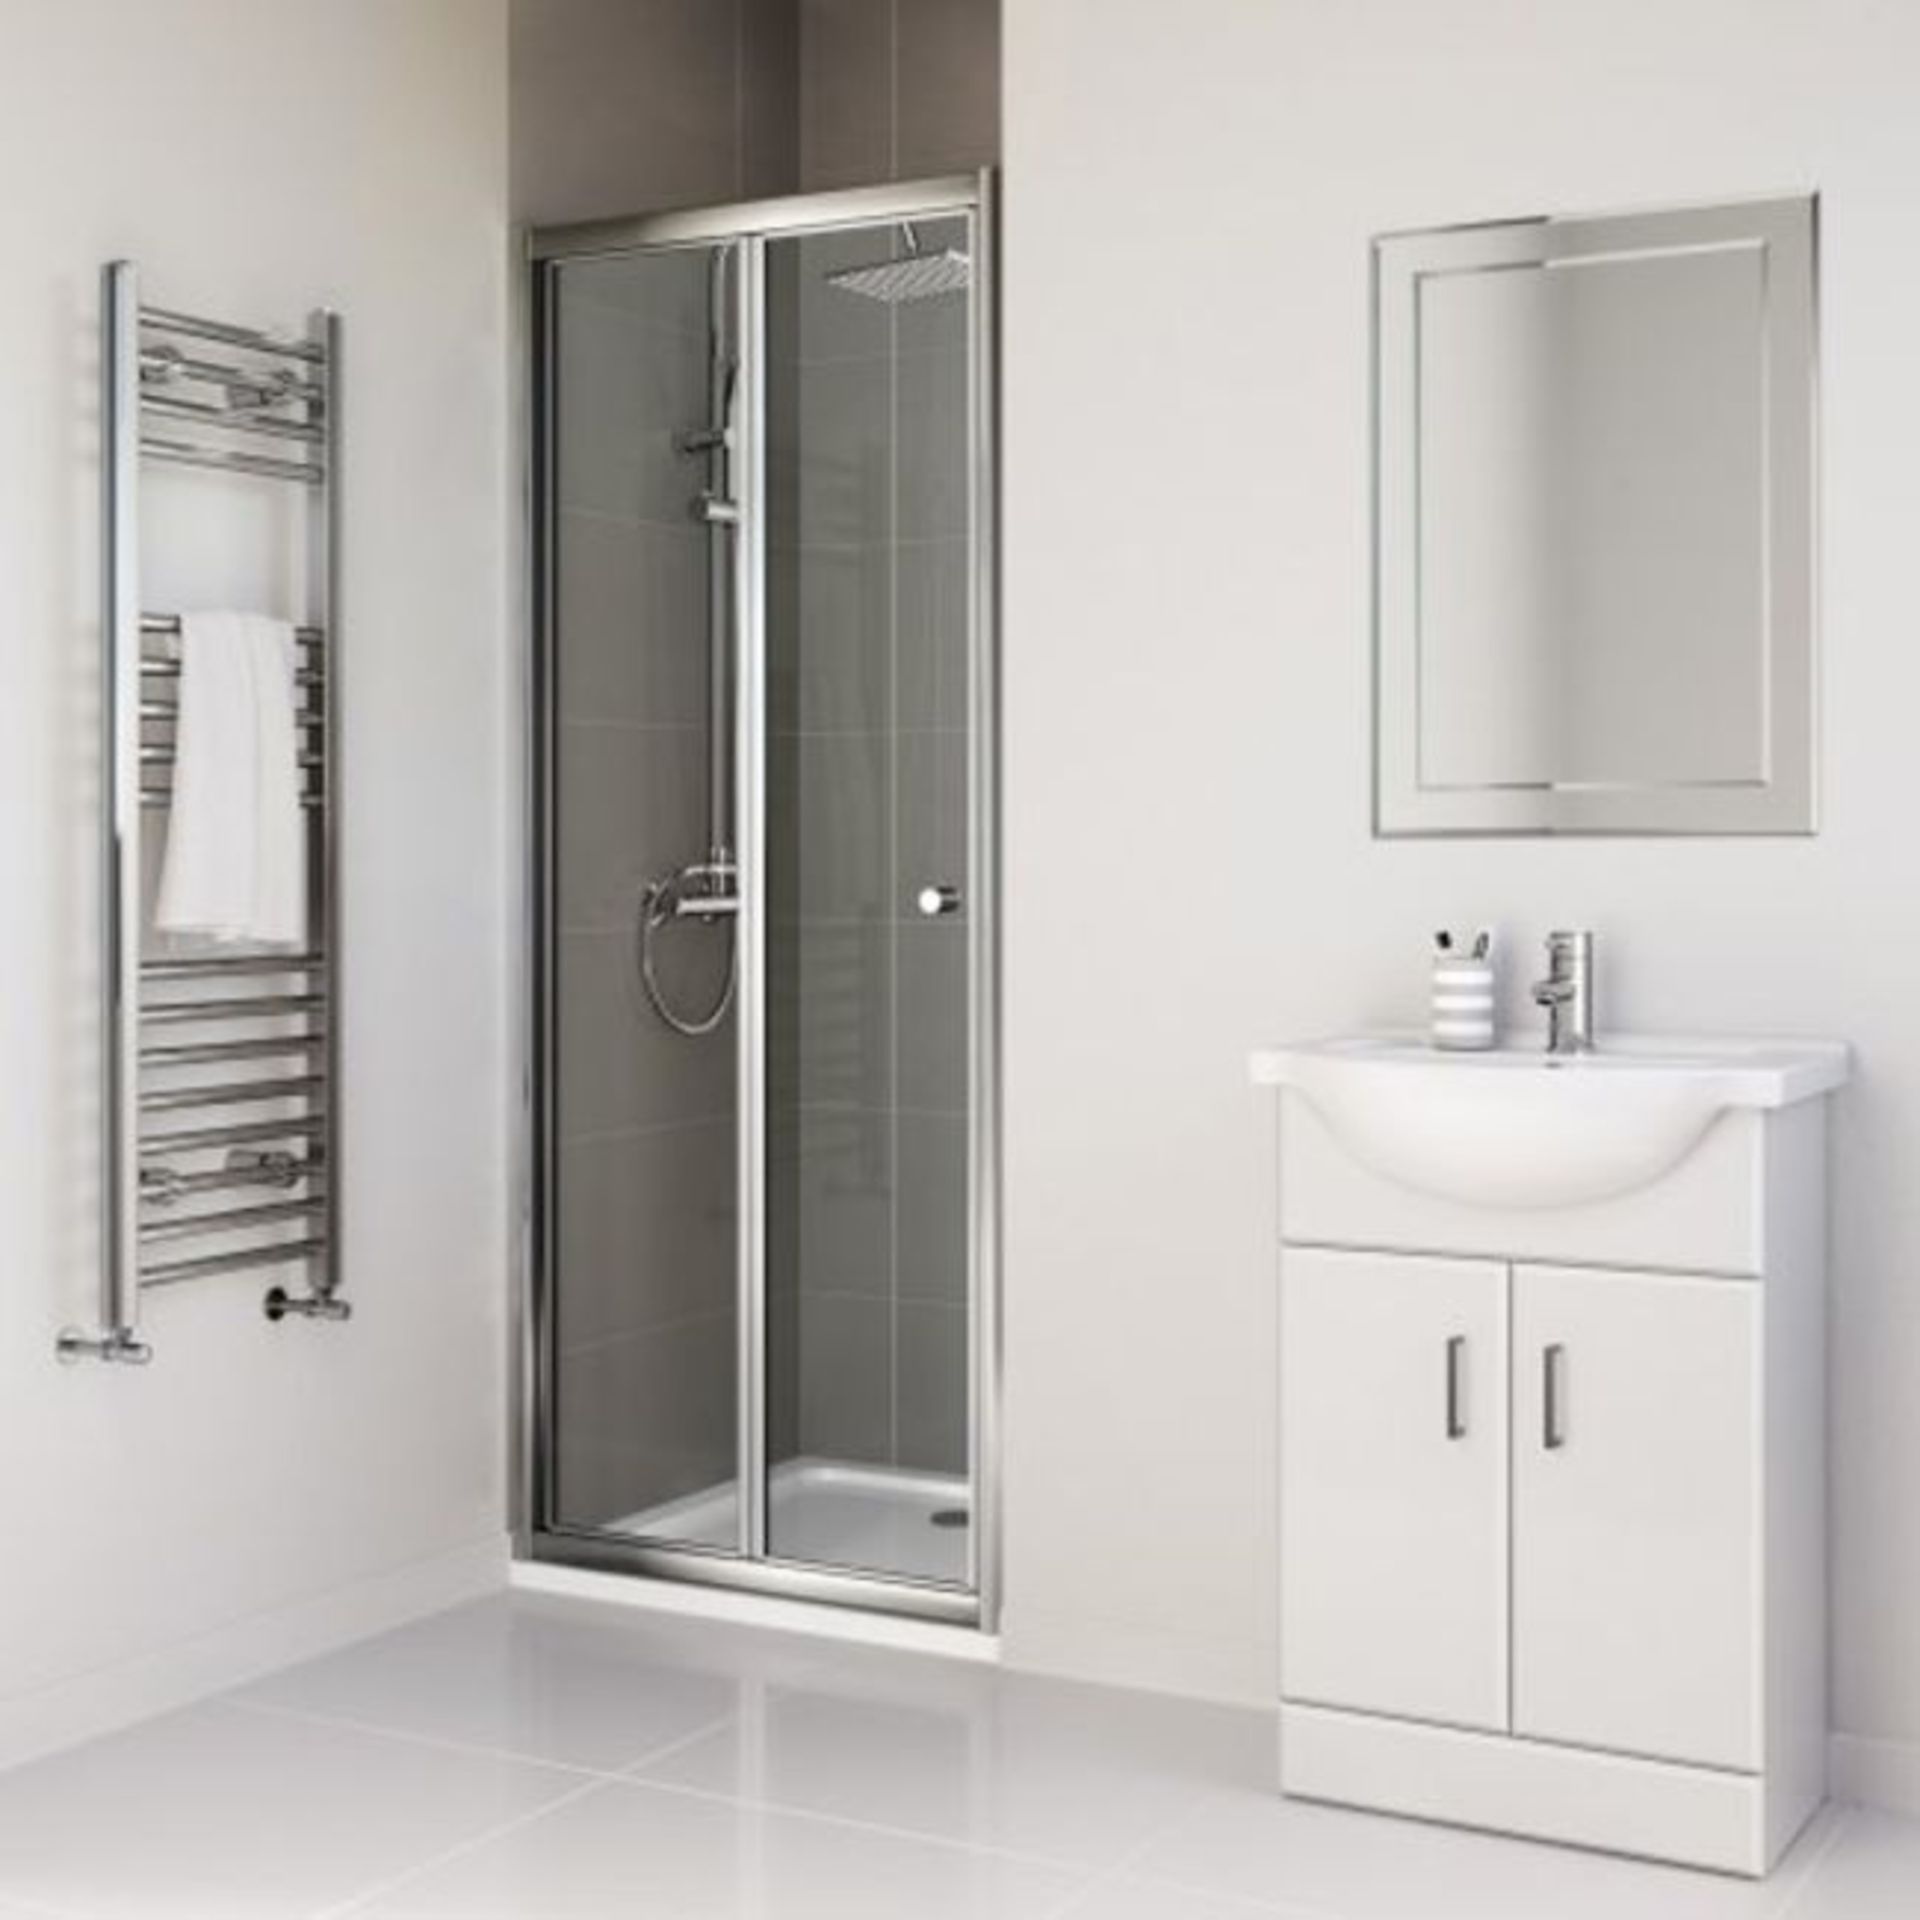 New (E52) 760mm - Elements Bi Fold Shower Door. RRP £299.99. Do You Have An Awkward Nook Or - Image 3 of 3